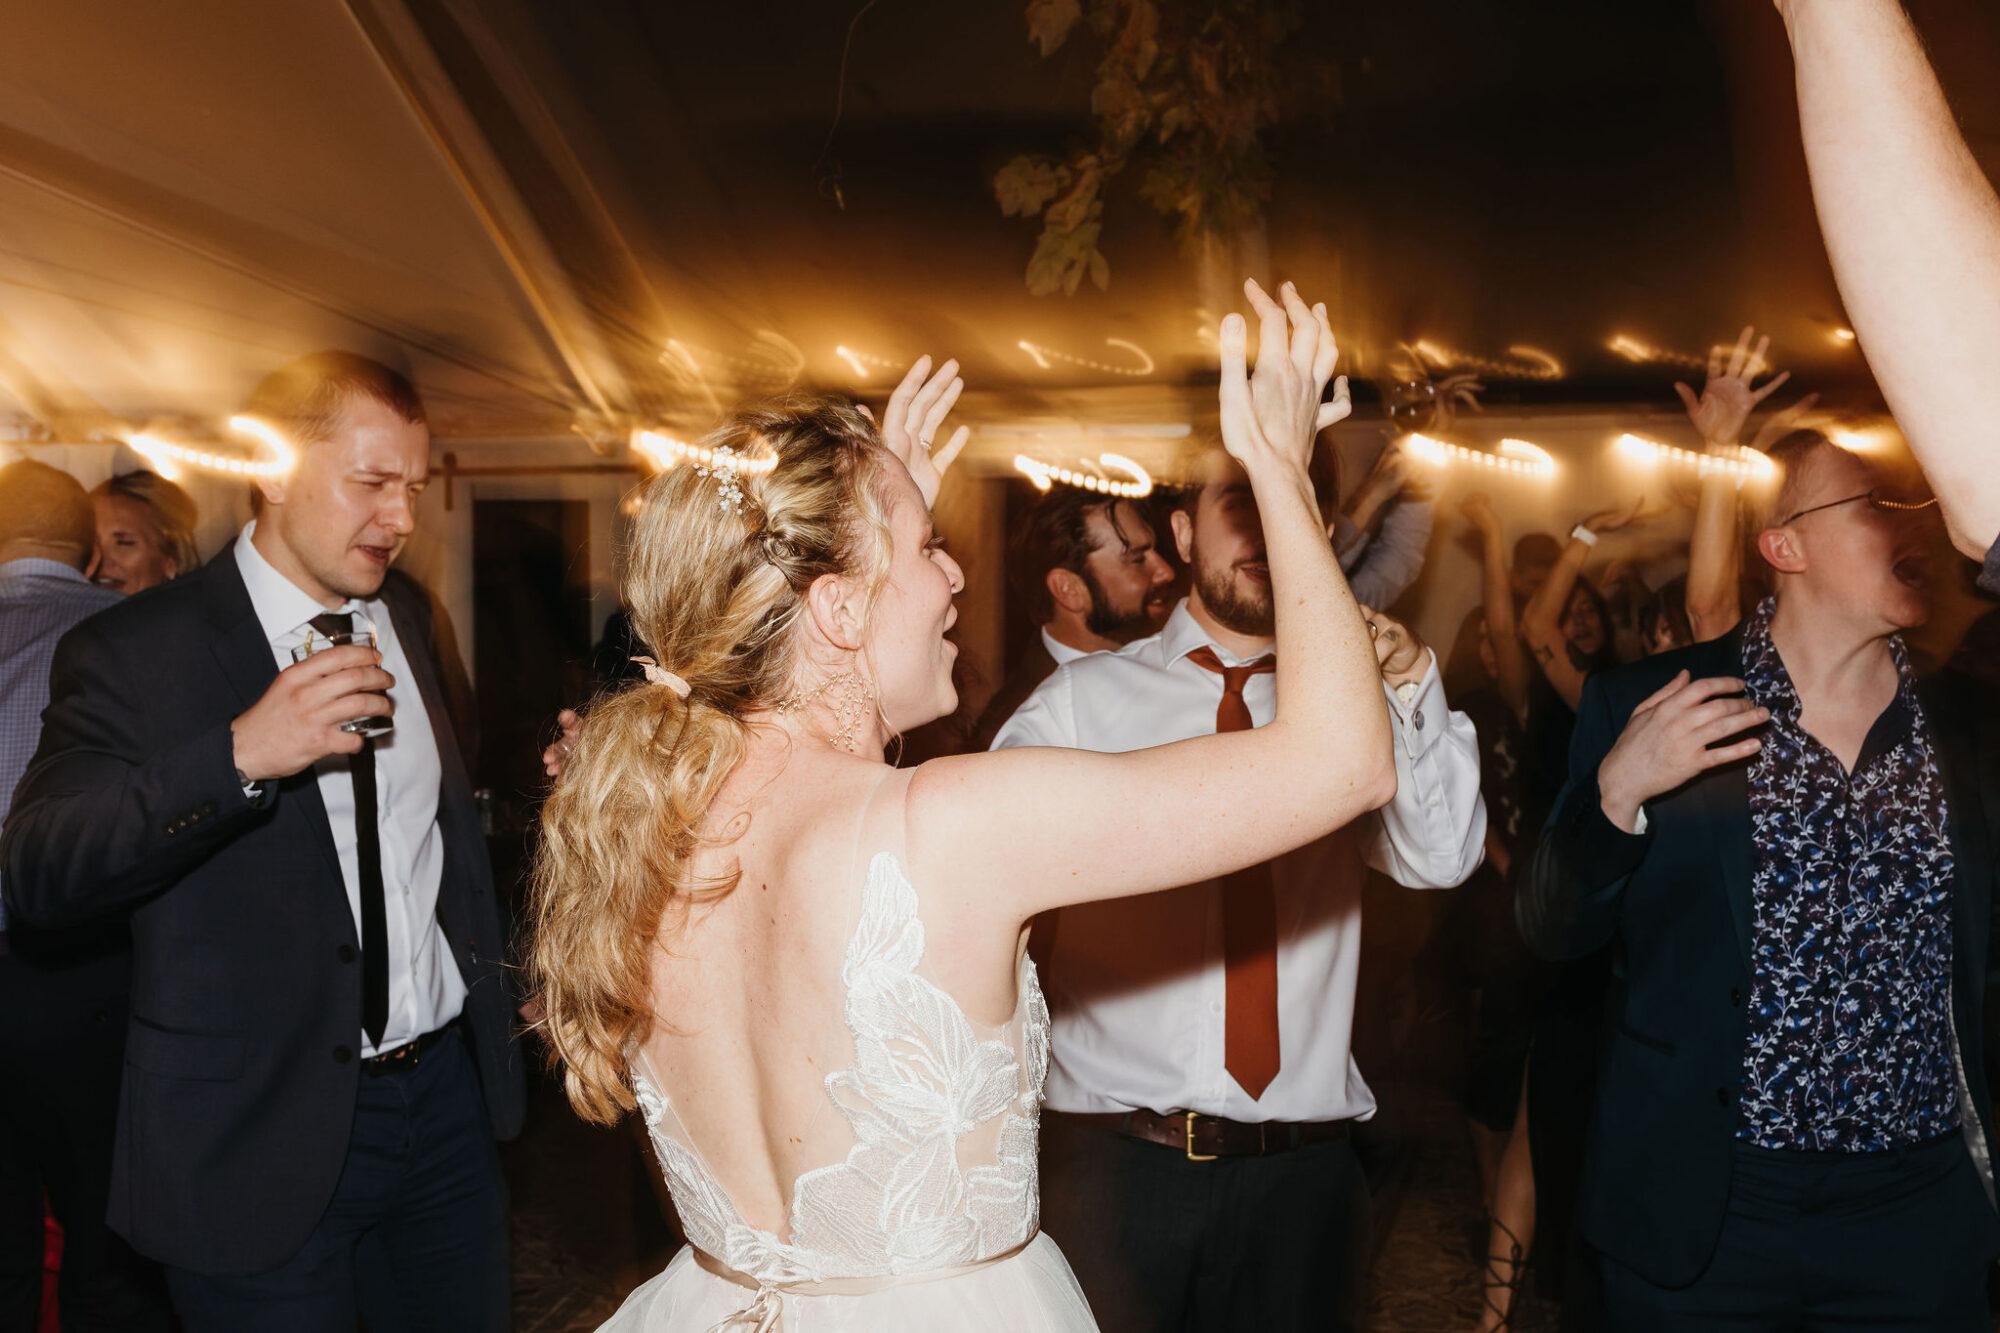 foxfire mountain house, catskill mountains, wedding, fall, fall florals, clear tent, reception, dancing, direct flash photos